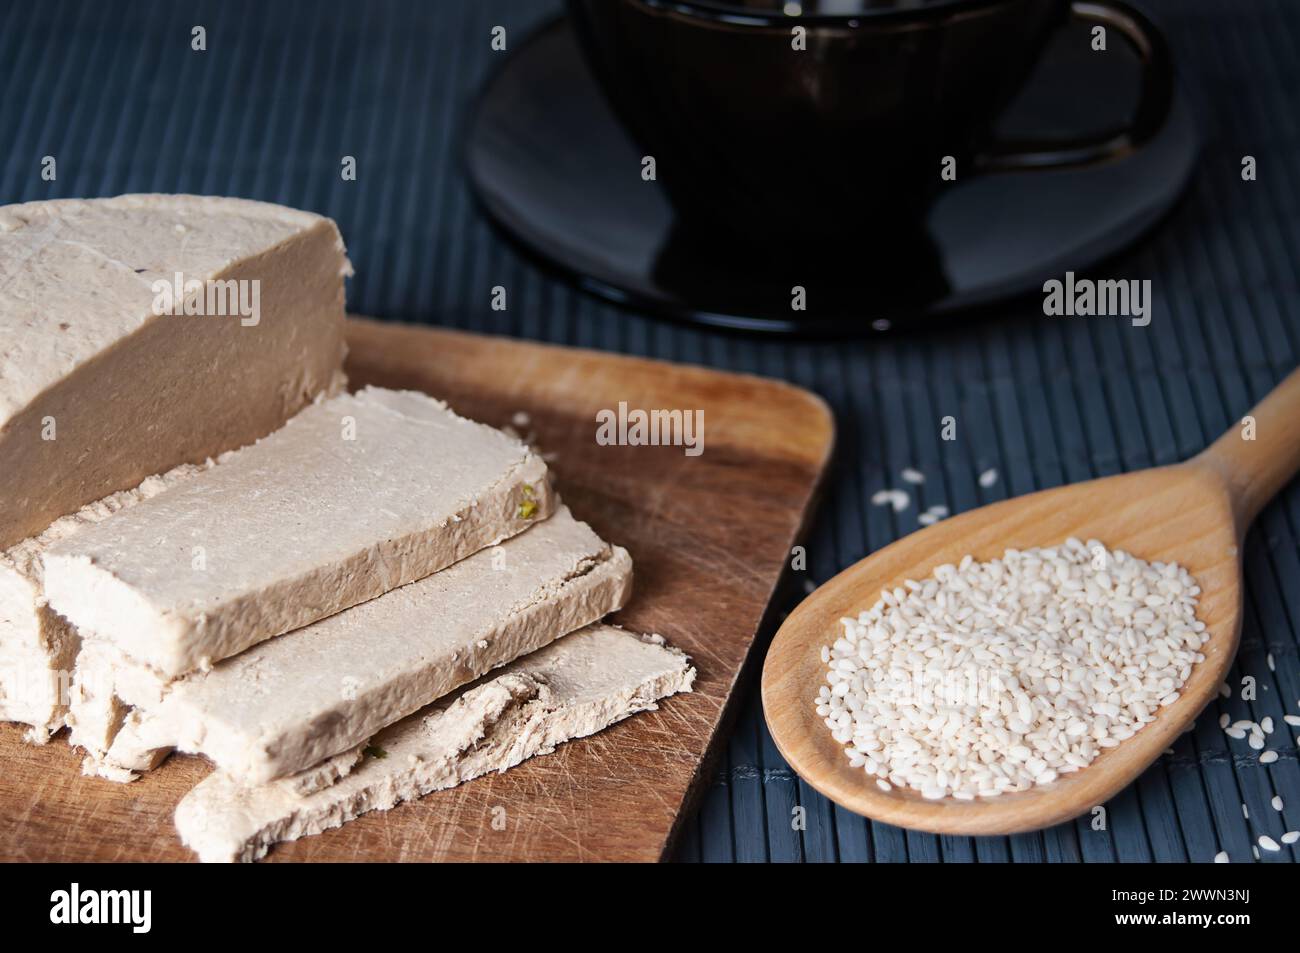 Sliced tahini halva, wooden spoon with sesame seeds and dark glass teacup close up Stock Photo